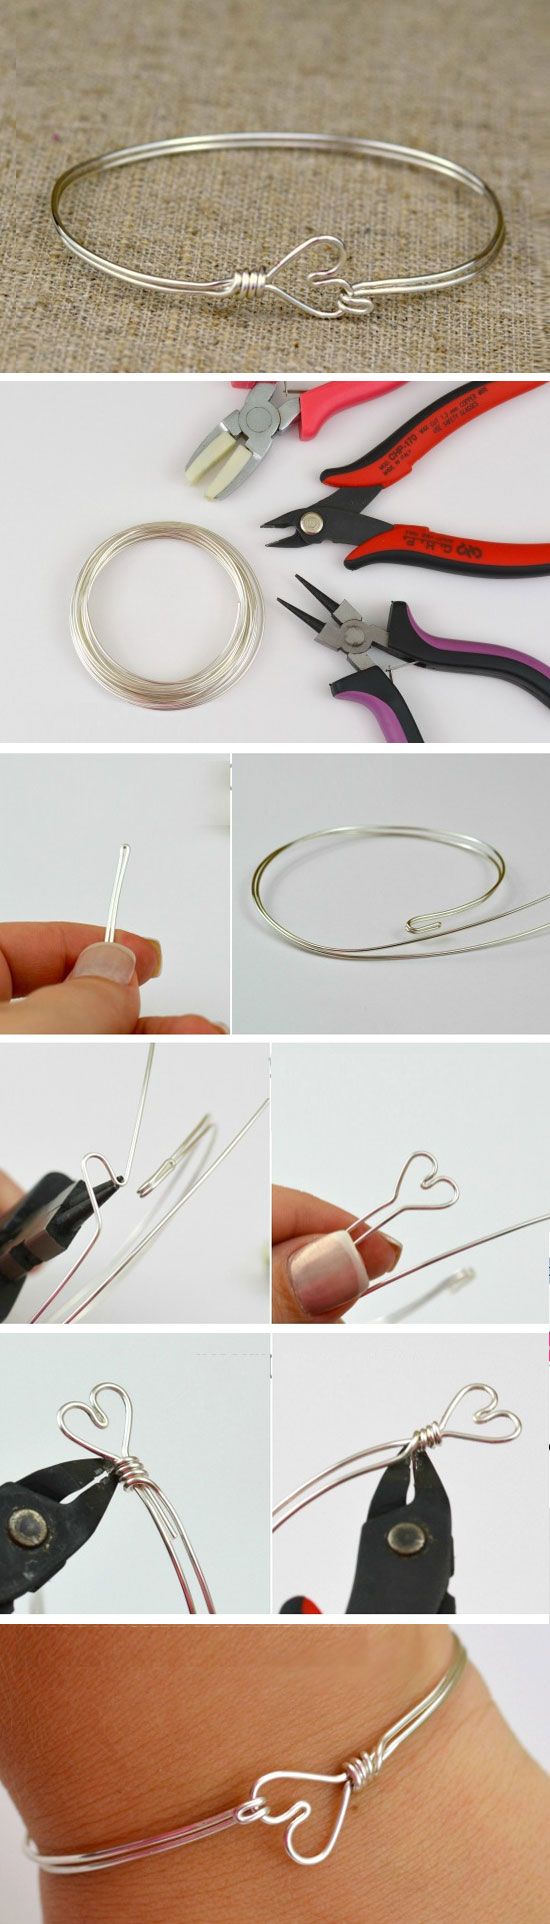 Heart Clasp Bangle | Click Pick for 20 Cheap and Easy Diy Gifts for Friends Idea...